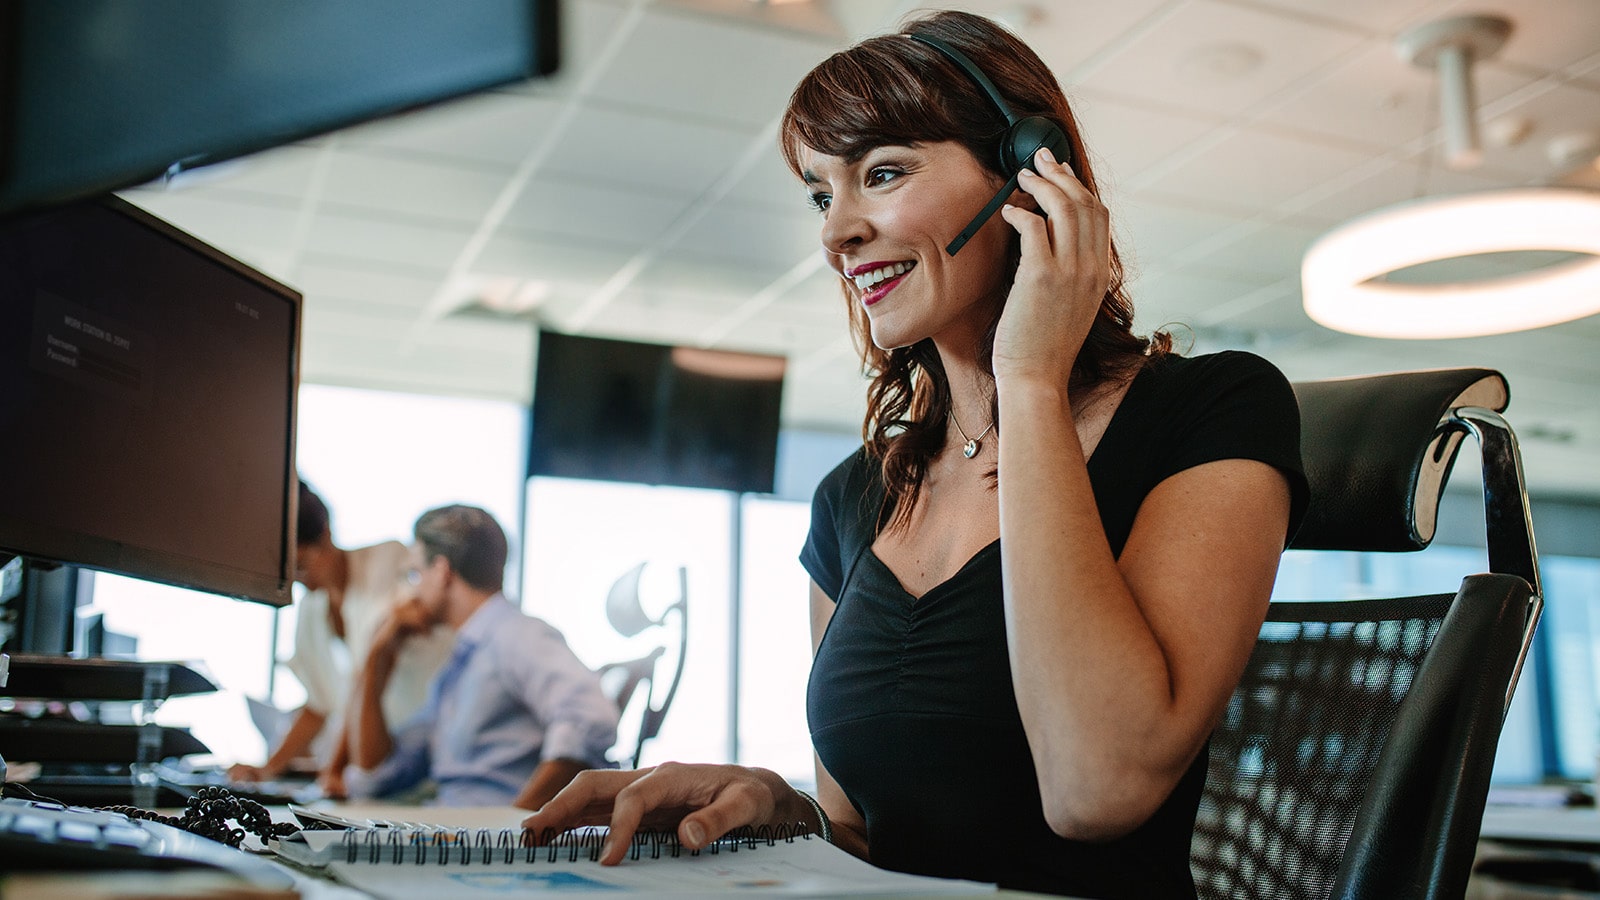 CAll center business woman talking on phone